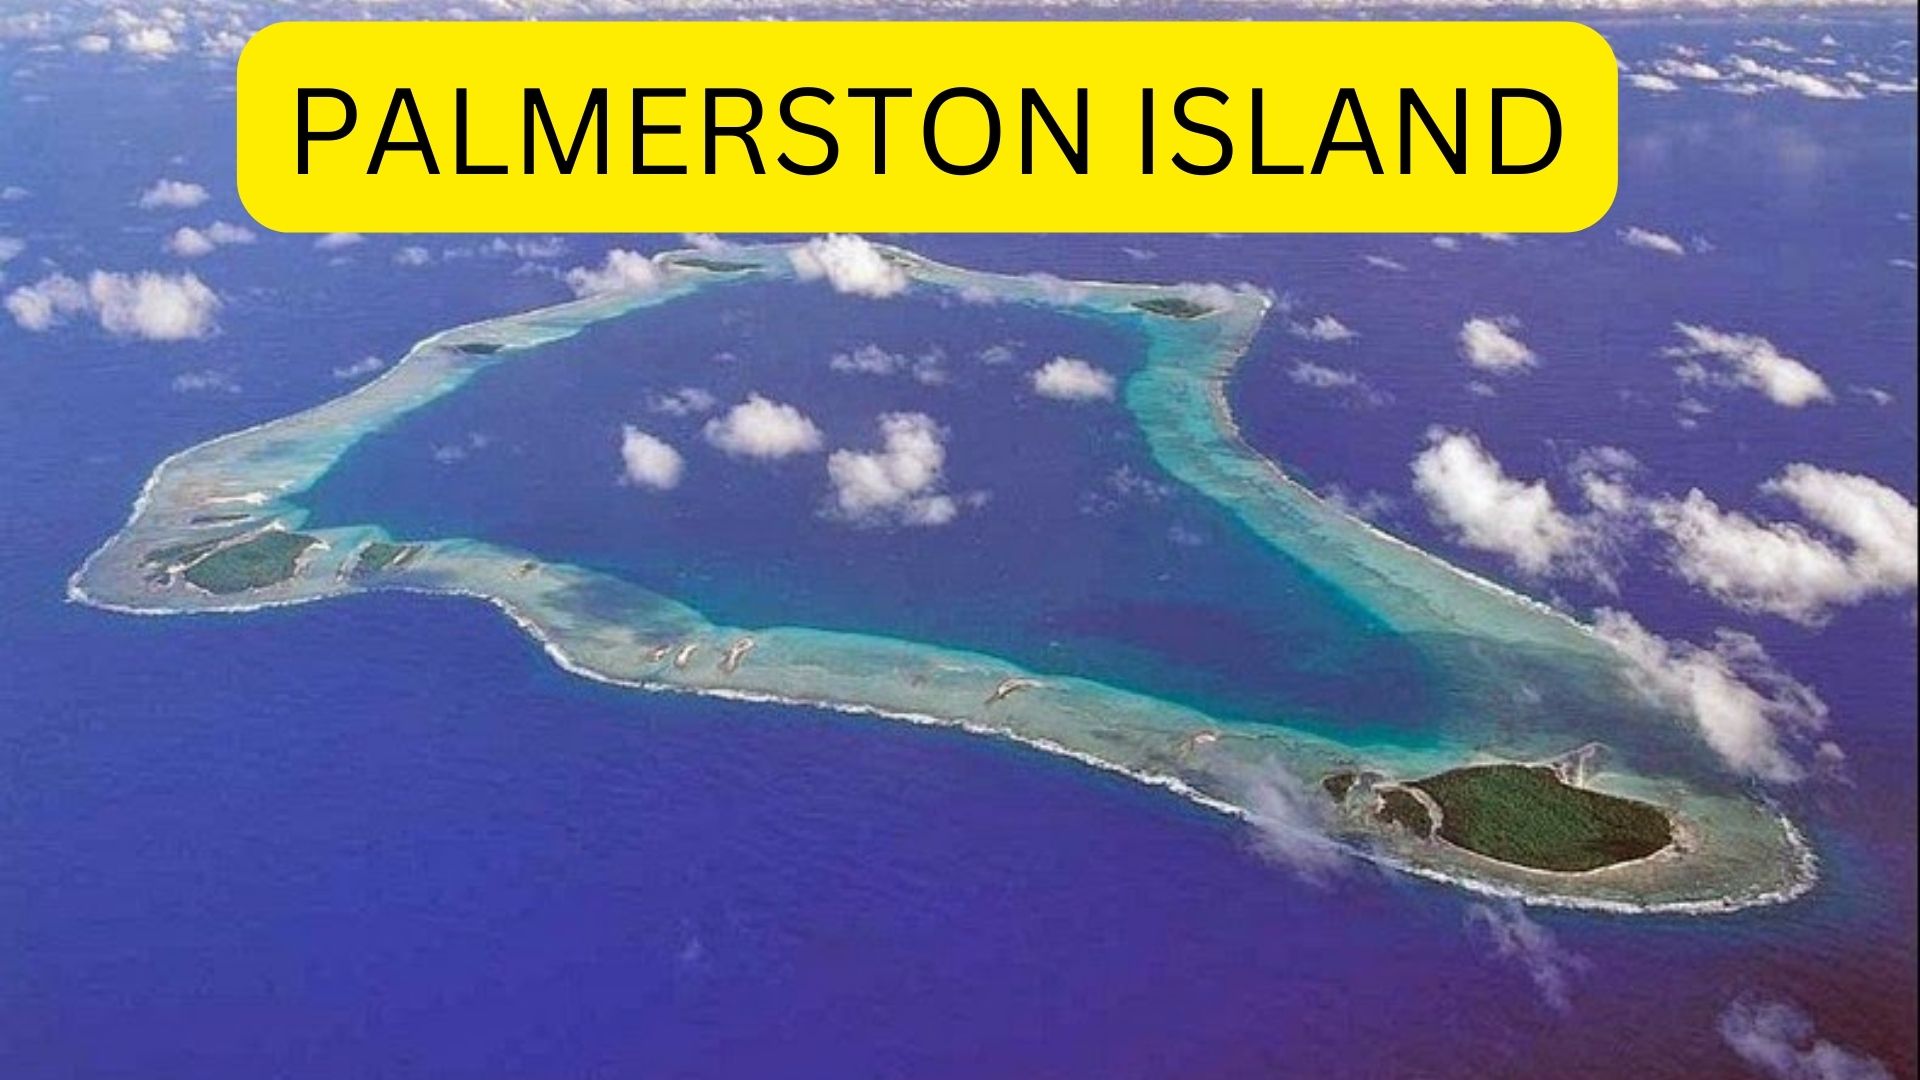 Palmerston Island - A Coral Atoll In The Cook Islands